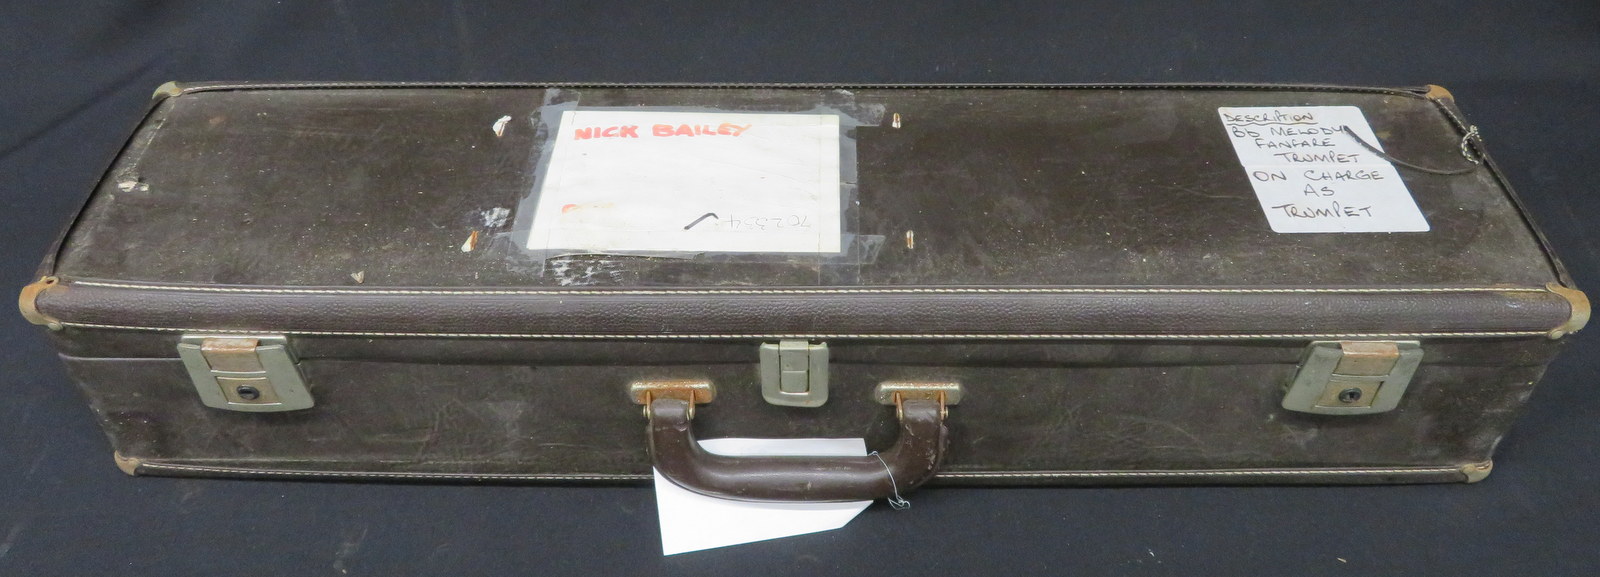 Boosey & Hawkes Imperial Besson fanfare trumpet with case. Serial number: 706-702334. - Image 15 of 16